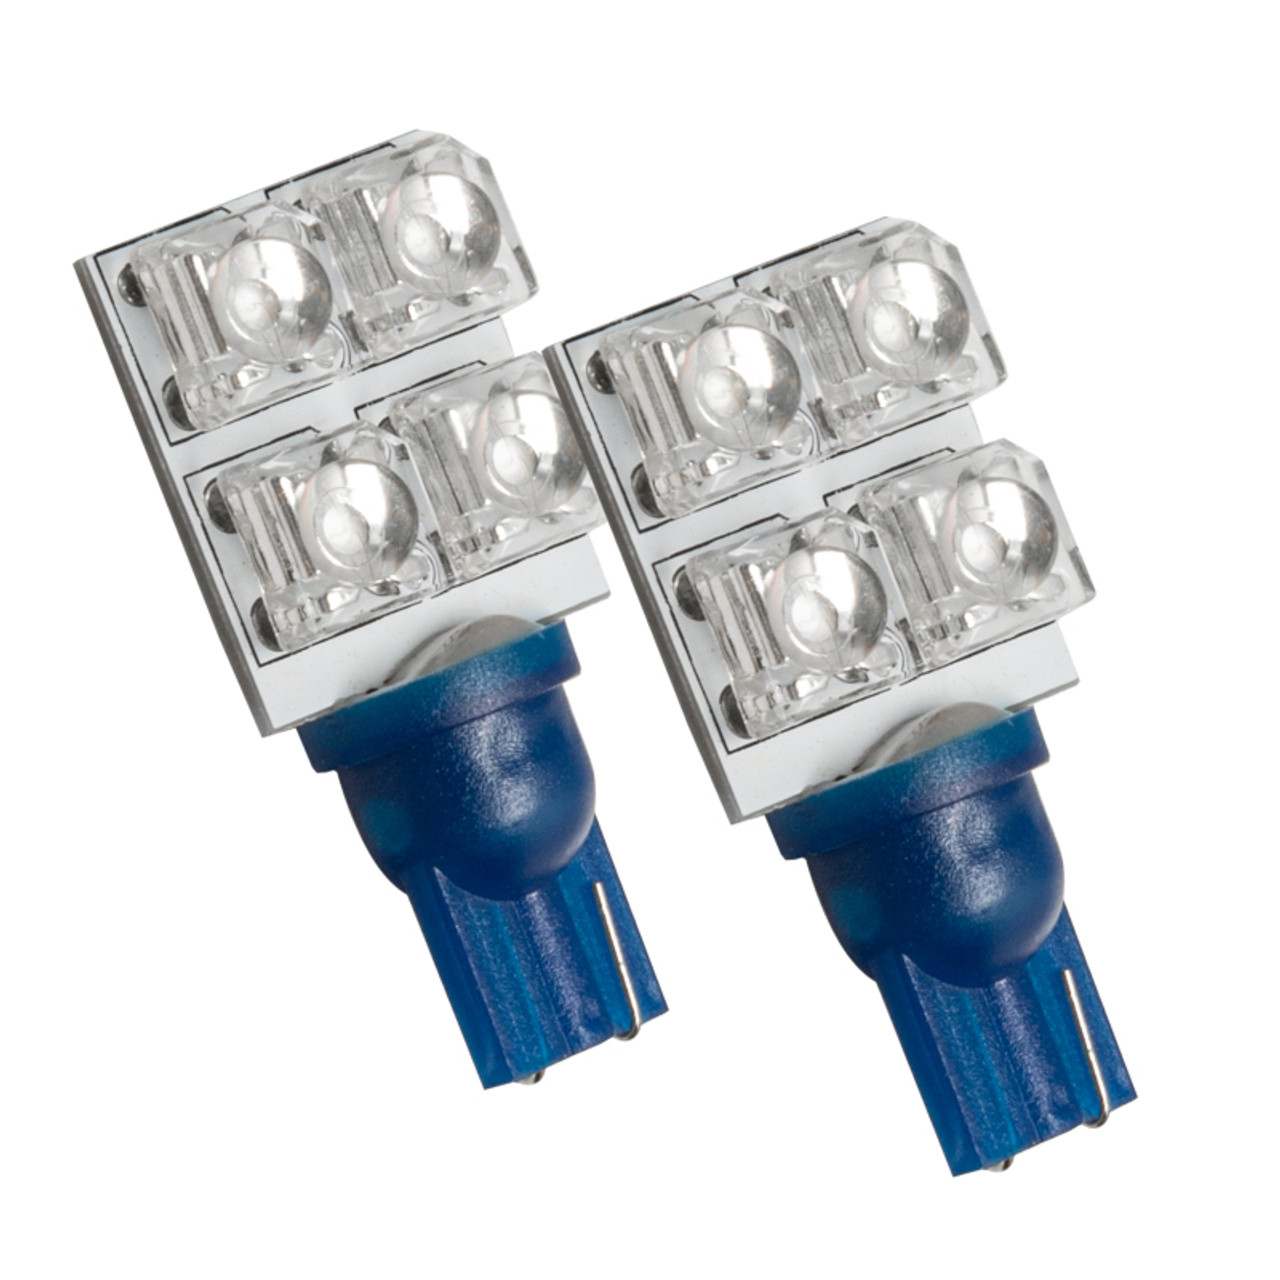 Oracle Lighting Cool White T10 9 LED 3 Chip SMD Bulbs Pair